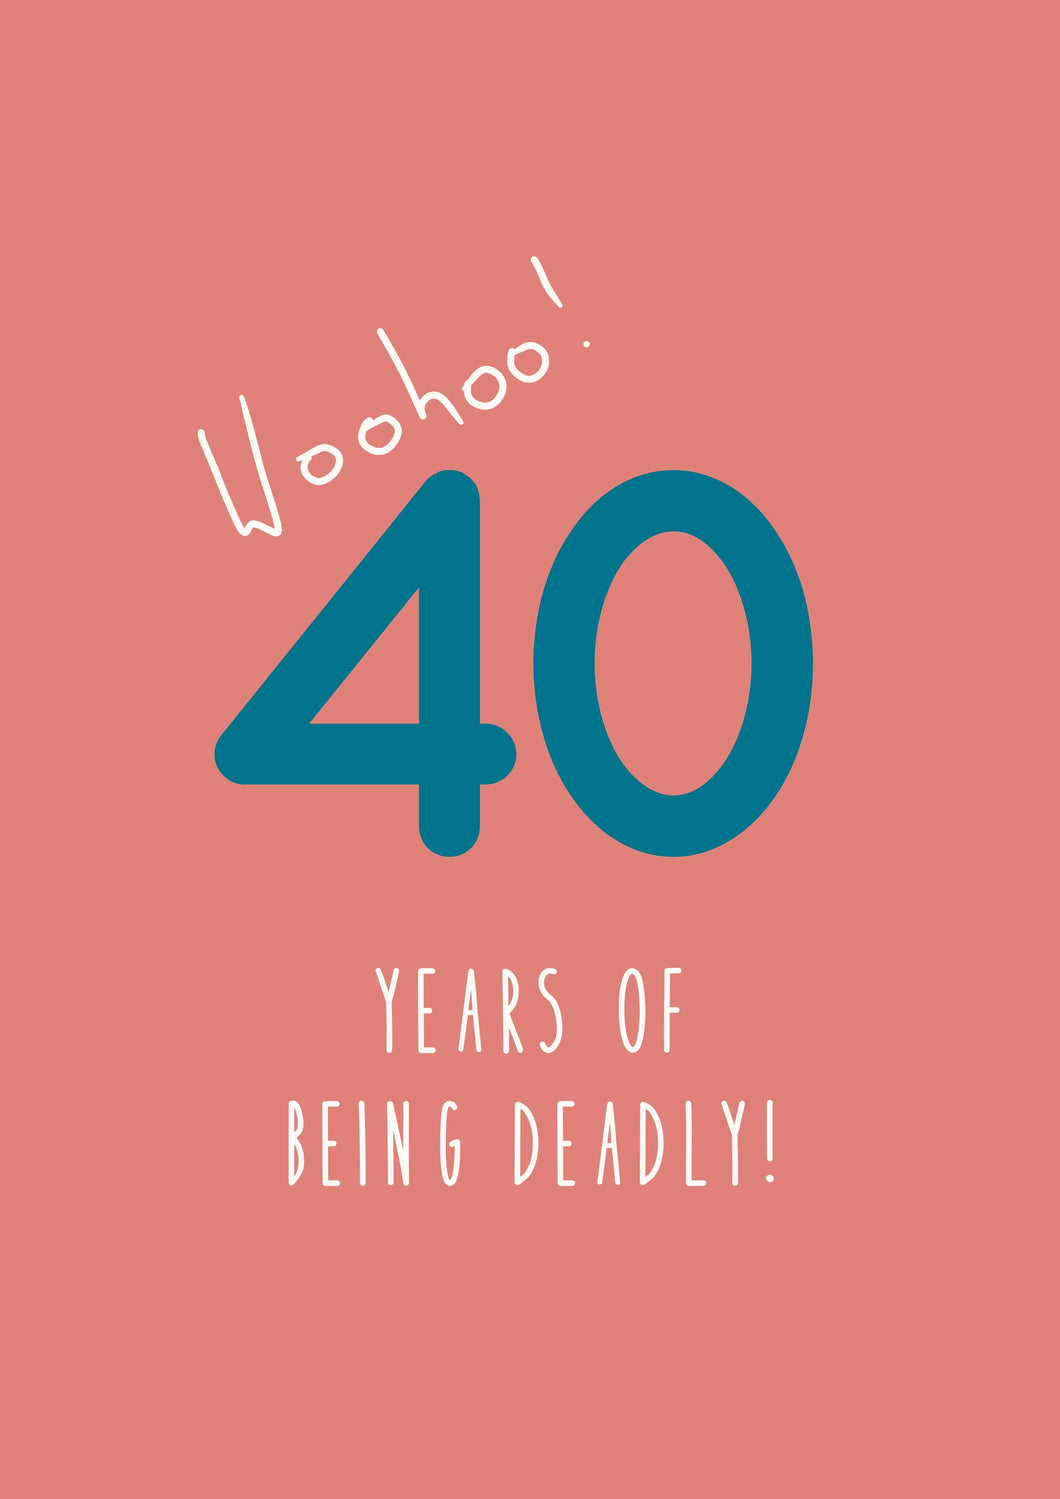 Woohoo. 40 years of being deadly!